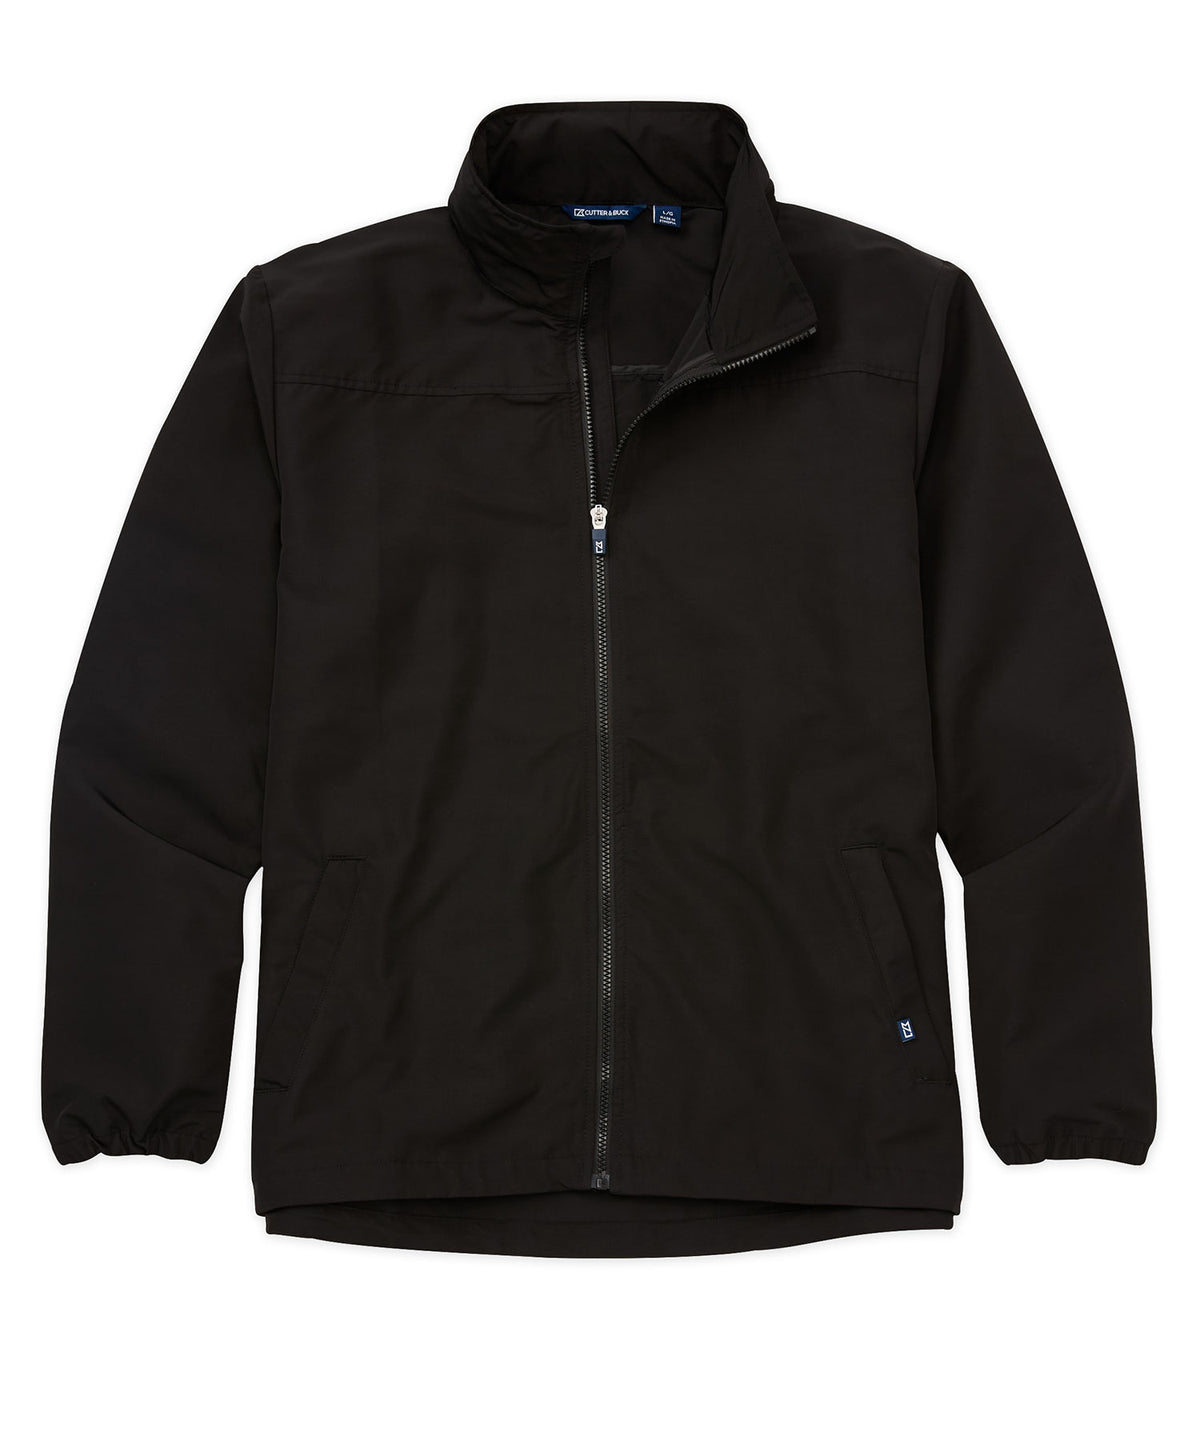 Cutter & Buck Charter Eco Knit Recycled Full-Zip Jacket, Big & Tall